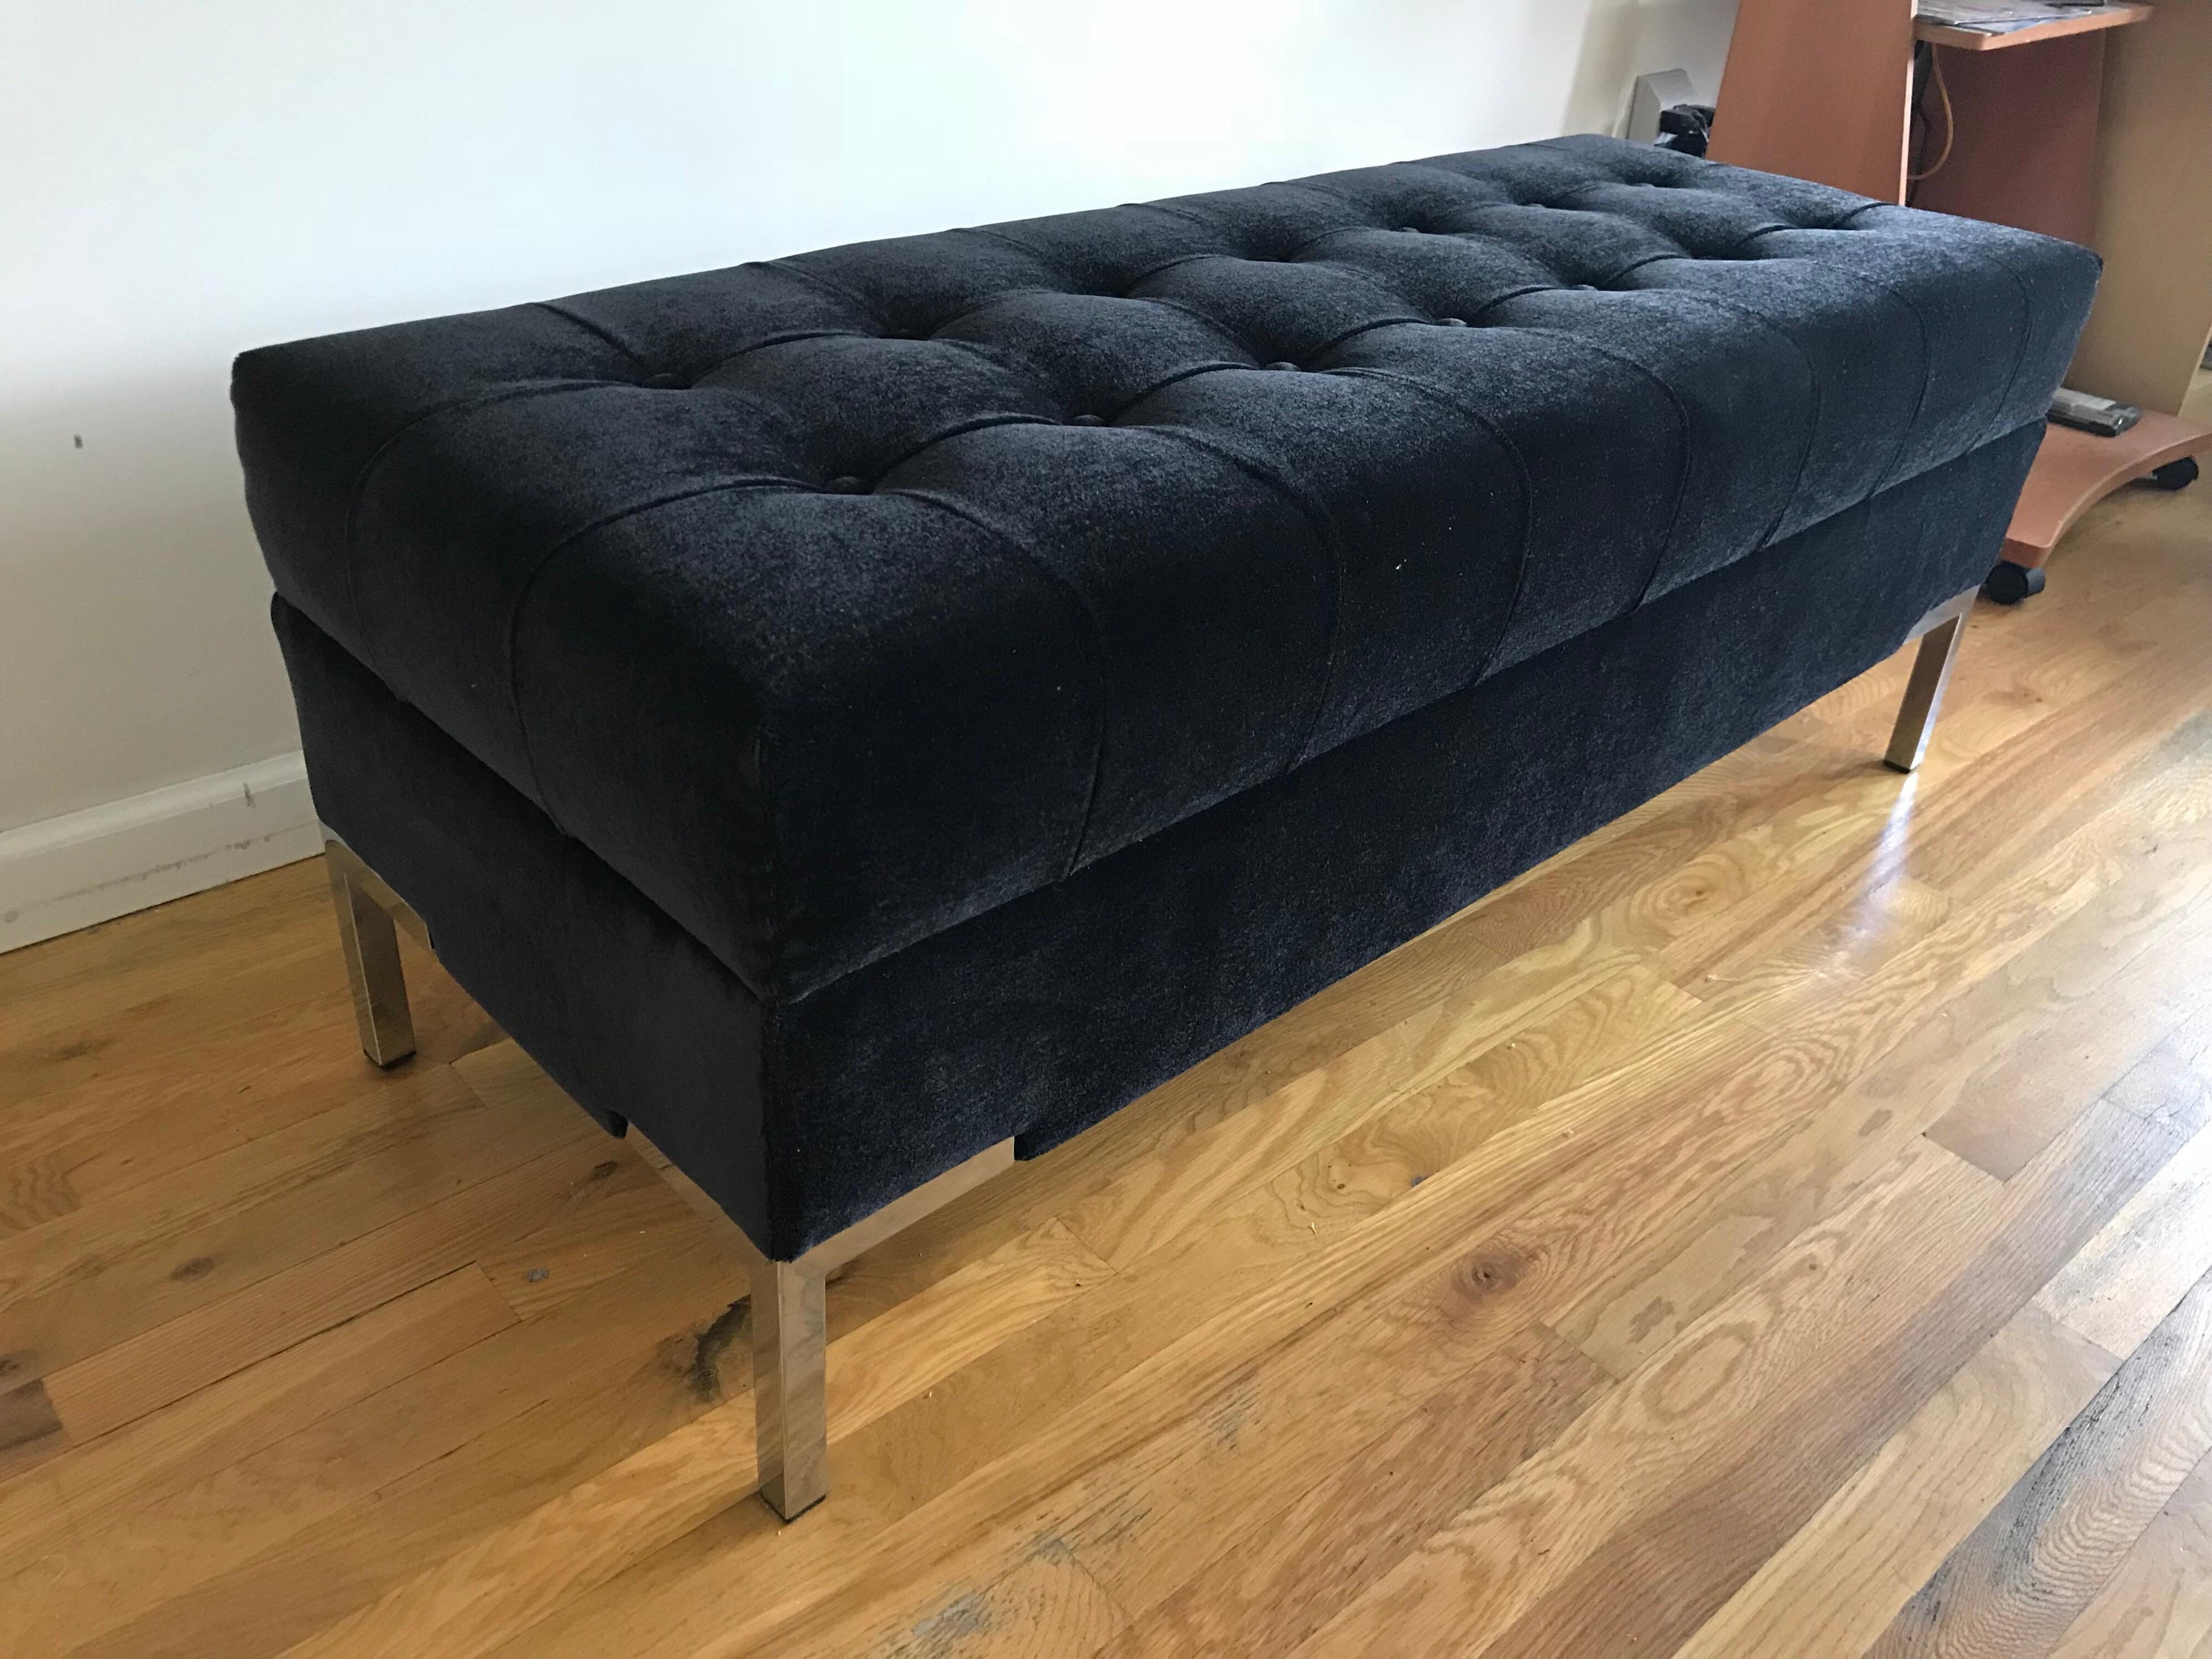 Custom made with integrated legs into the body of the mohair midcentury style bench. Upholstered in rich charcoal mohair, with buttons and seaming. This bench is available immediately as it is or is available in any size custom-made to order COM /